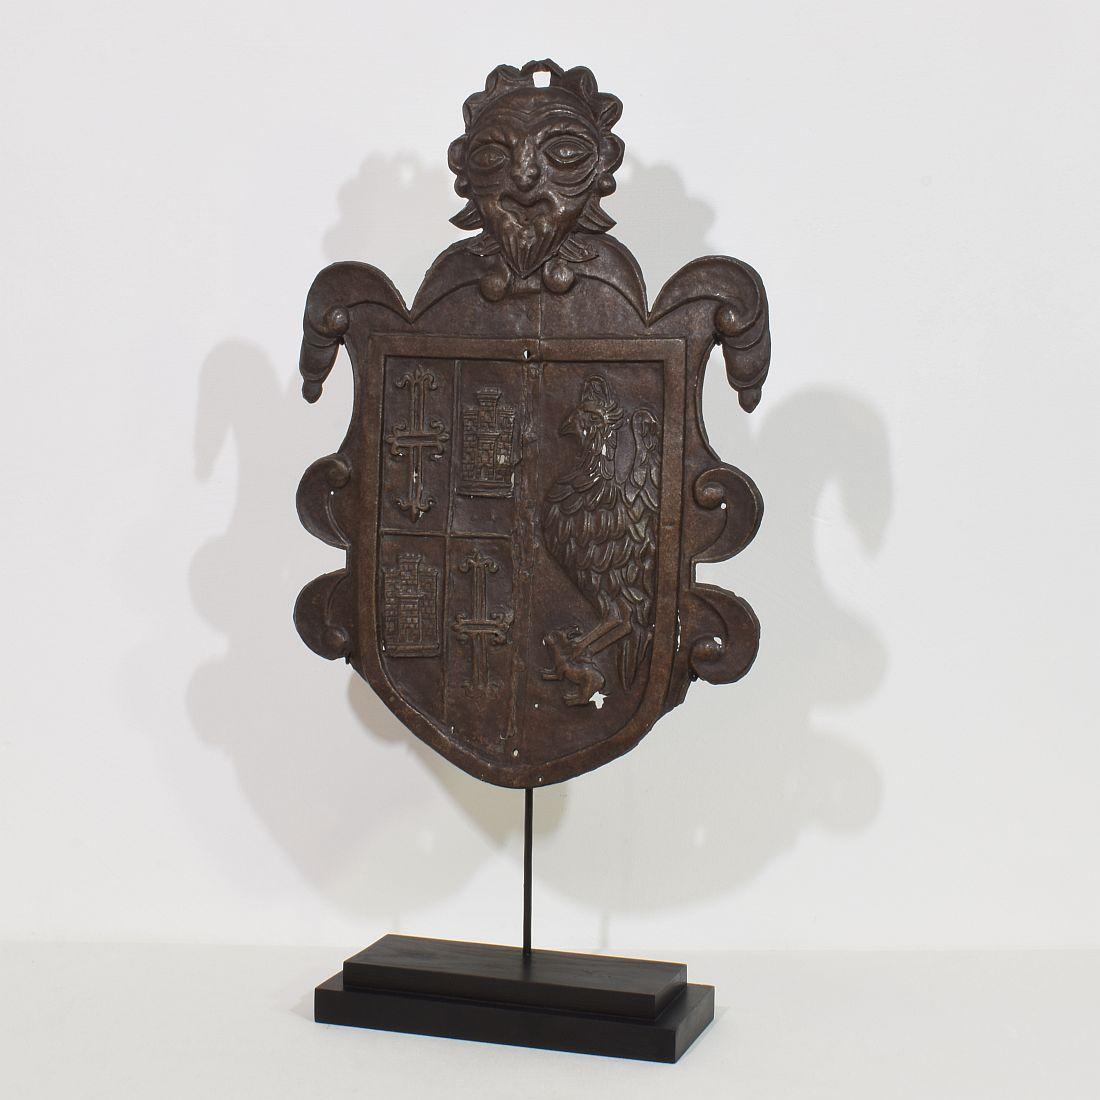 Unique and wonderful folk art coat of arms, Depicting a eagle holding a rabbit, two crosses and two castle's and on the top a grotesque head. This beautiful period piece is made out of forged iron and comes from the region of Florence. Due to its